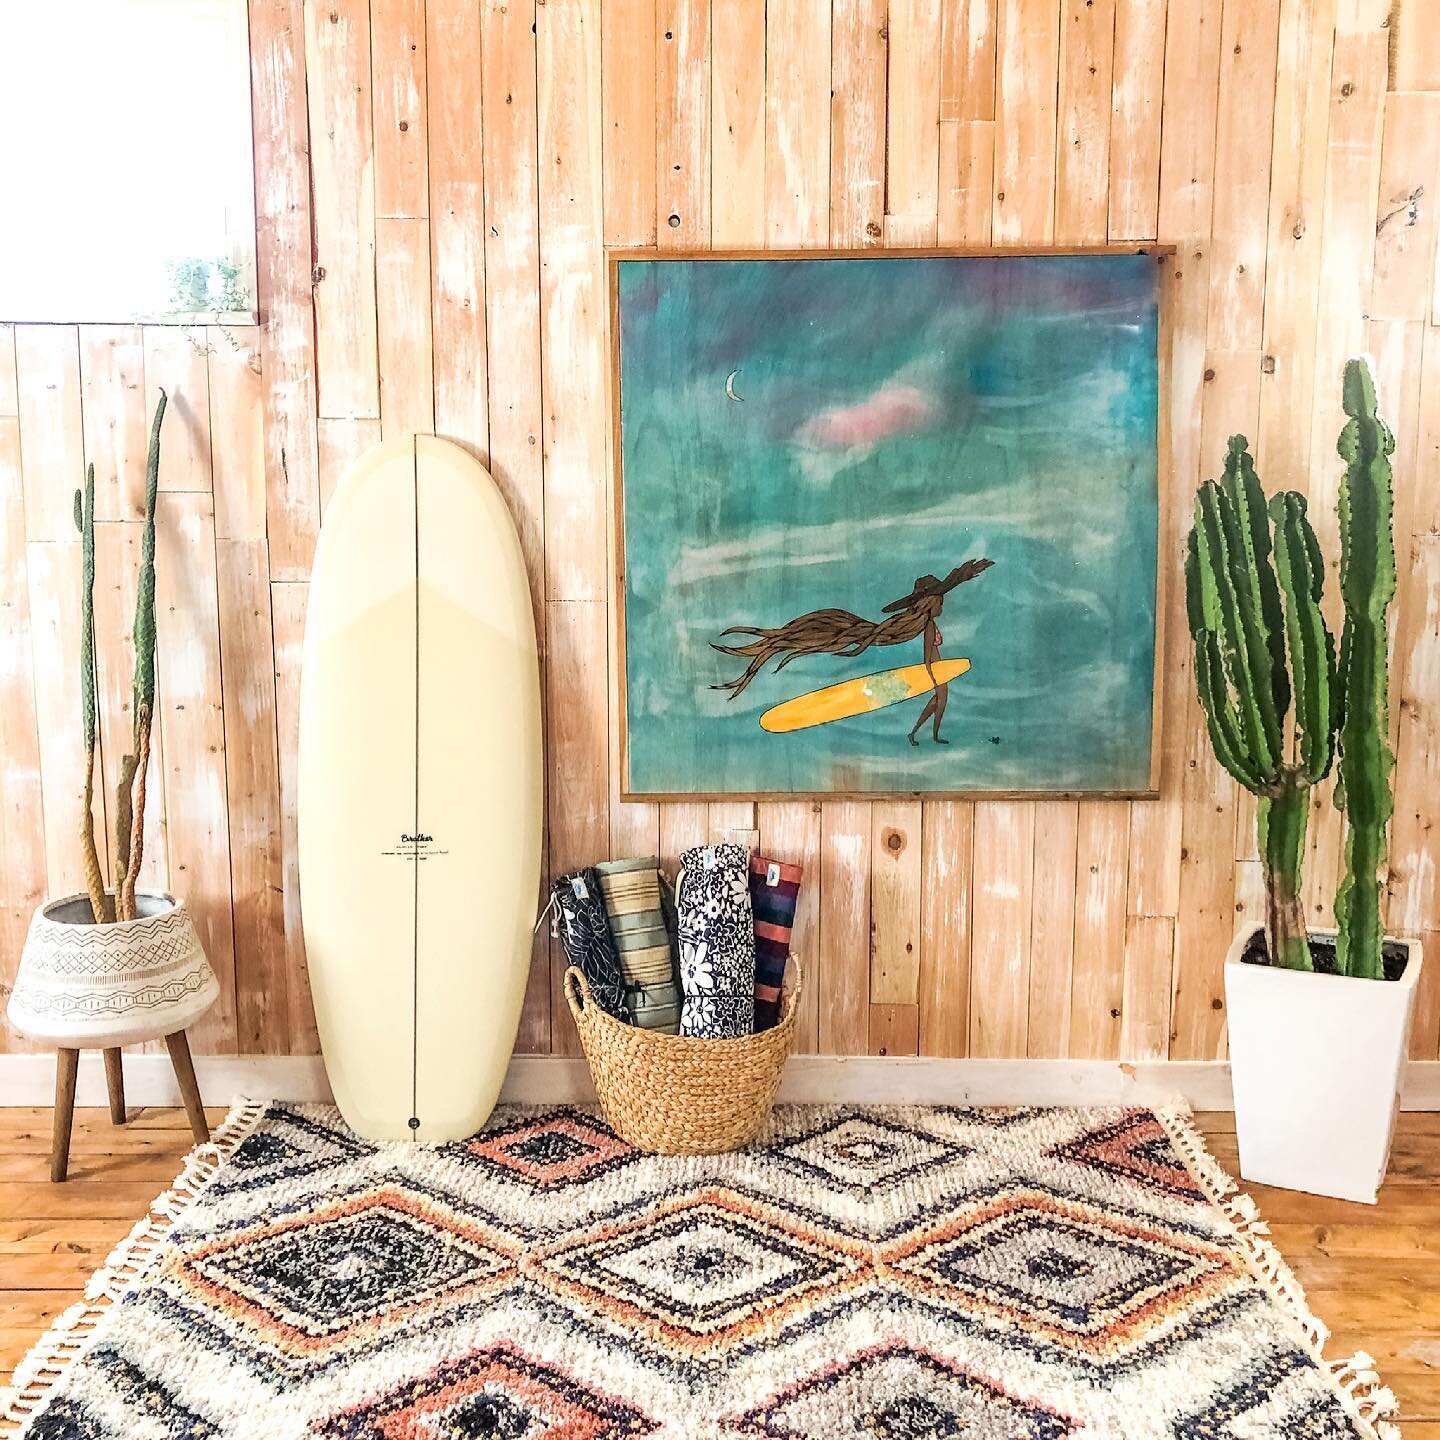 💫 Morning Views ☀️ 
.
.
We are loving how the morning sun lights up the shop!! So much warmth inside these walls that we can&rsquo;t wait to share with you!!
.
Featured &amp; Functional Art 
. @brother_surfcrafts  5&rsquo;4 Bar of Soap 🧼 
. @kristi